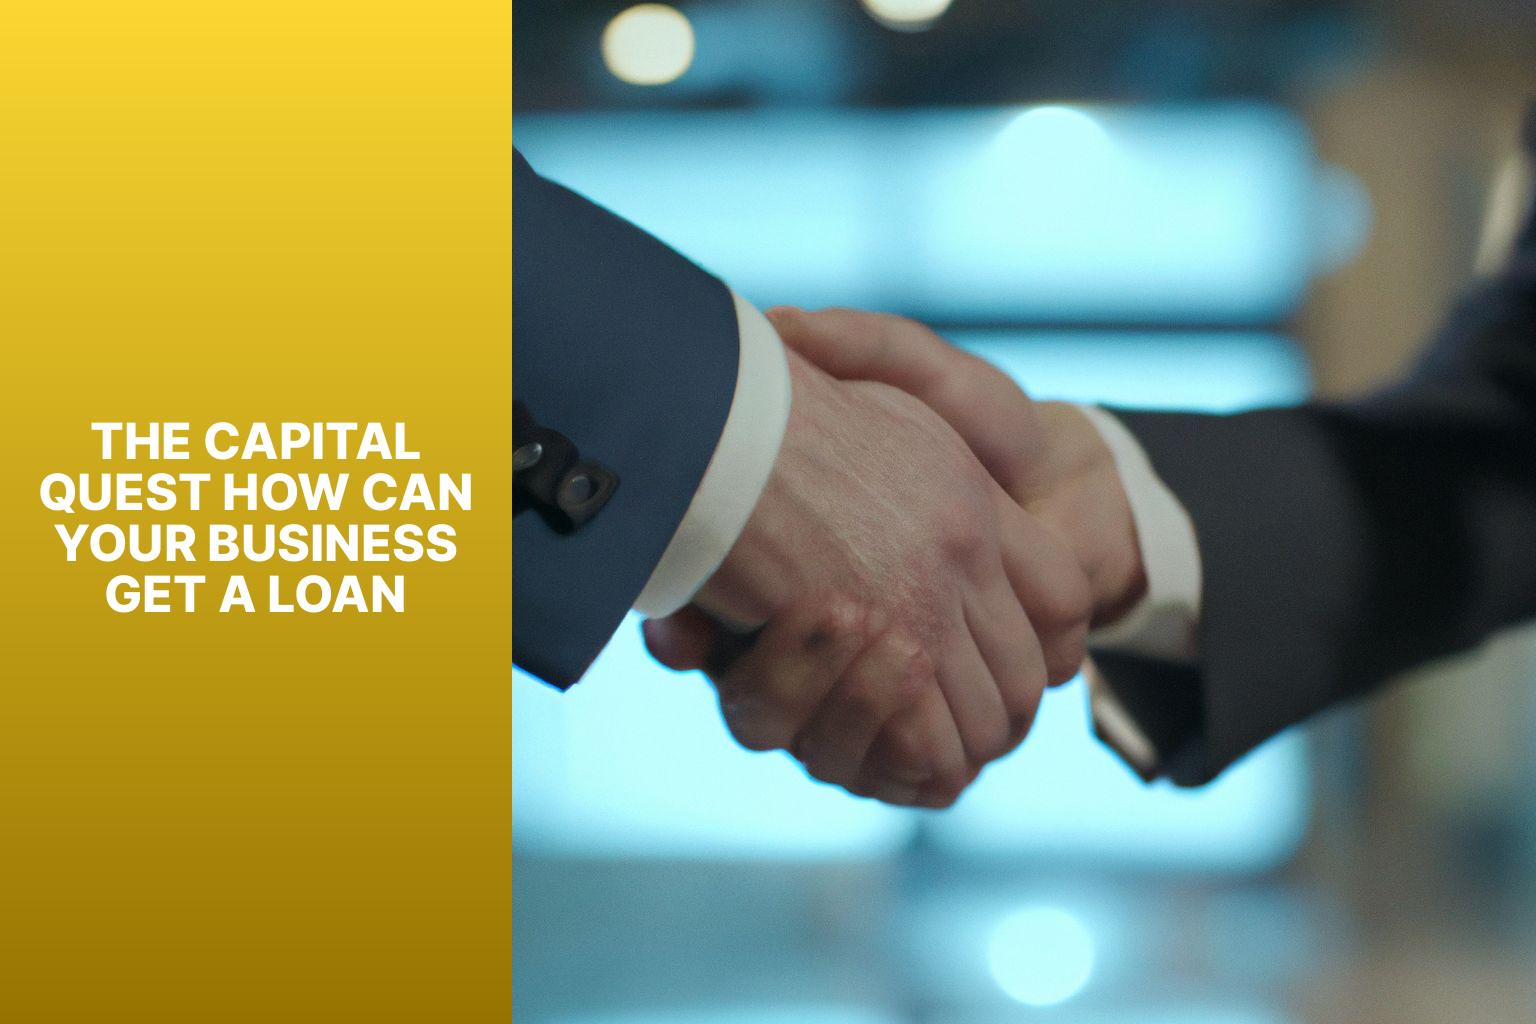 The Capital Quest How Can Your Business Get a Loan